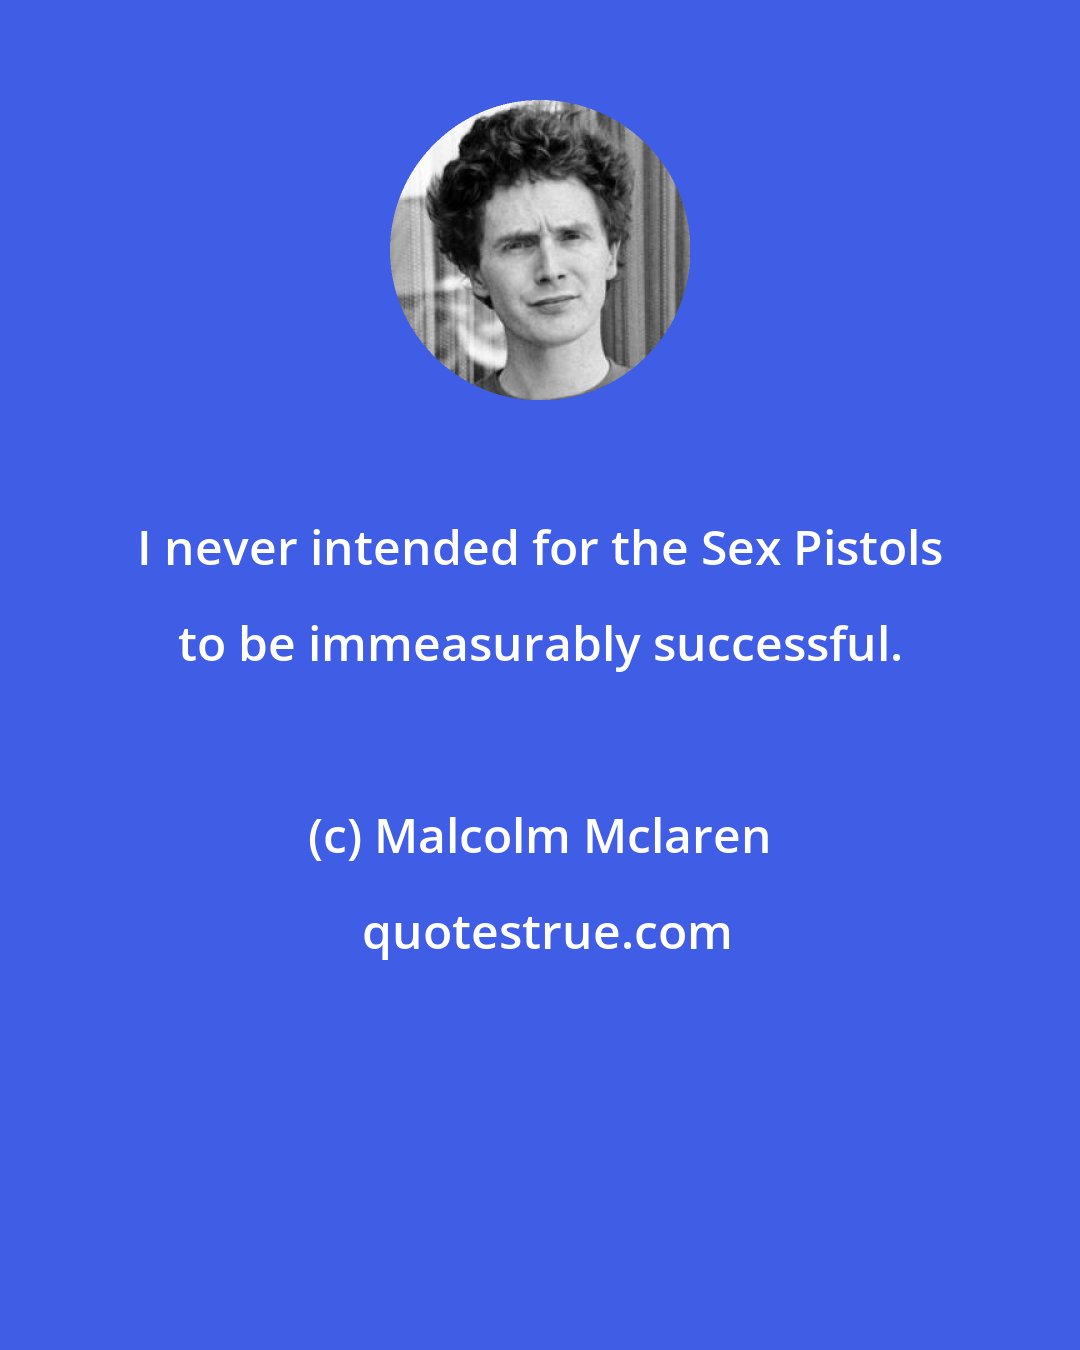 Malcolm Mclaren: I never intended for the Sex Pistols to be immeasurably successful.